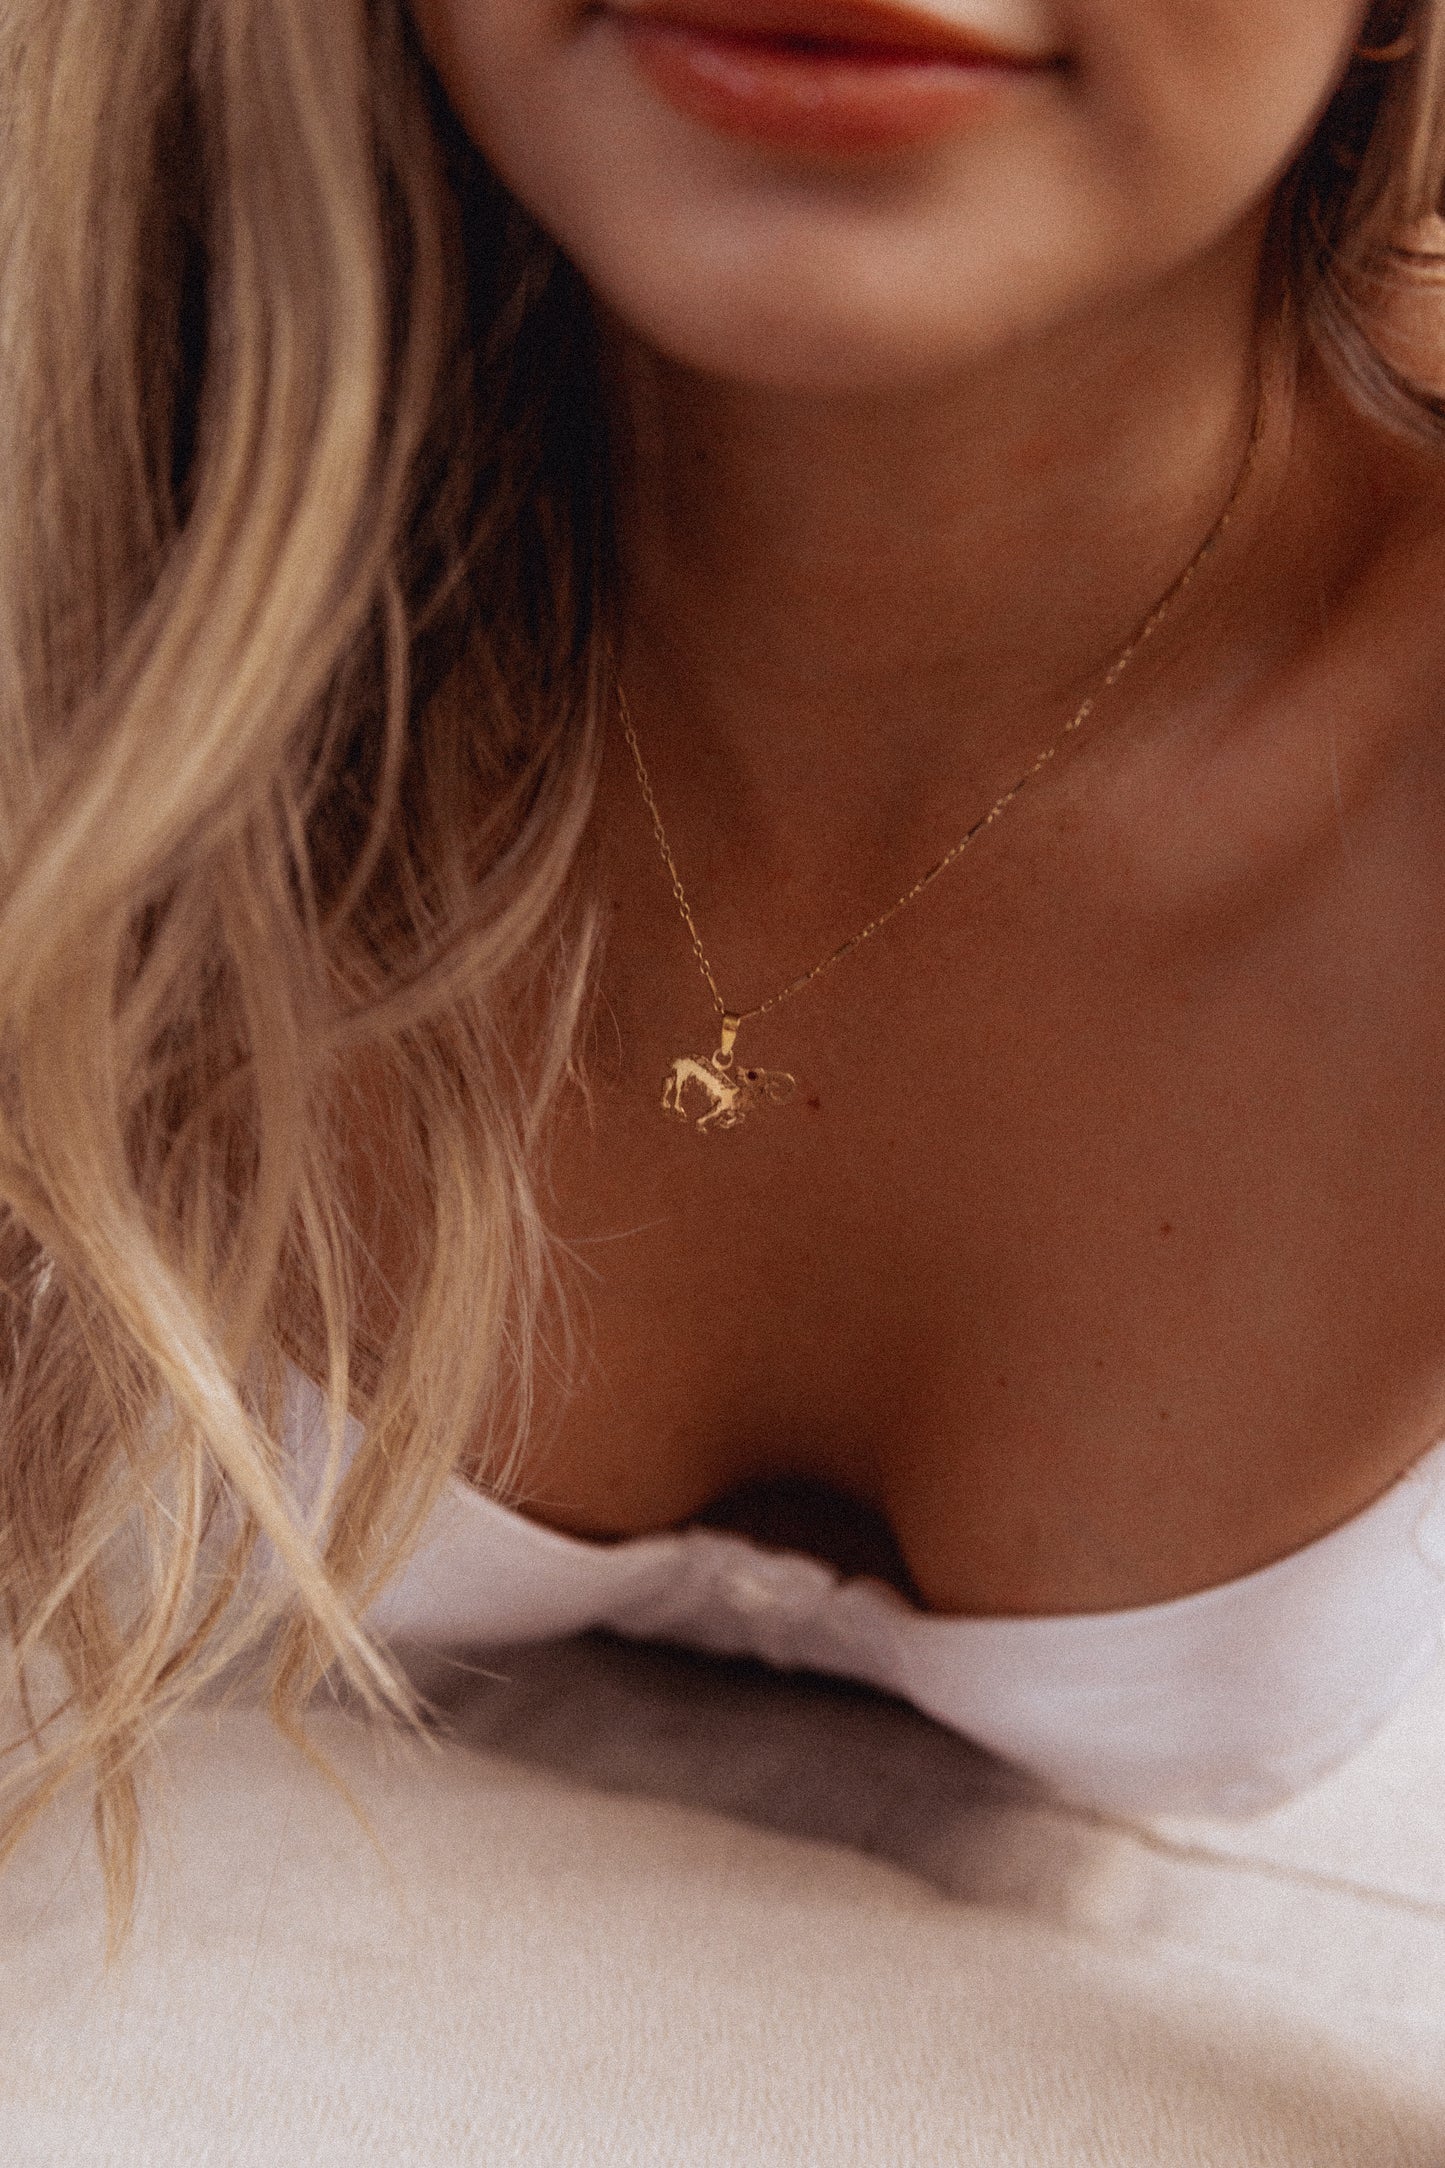 Solid Gold Aries Necklace